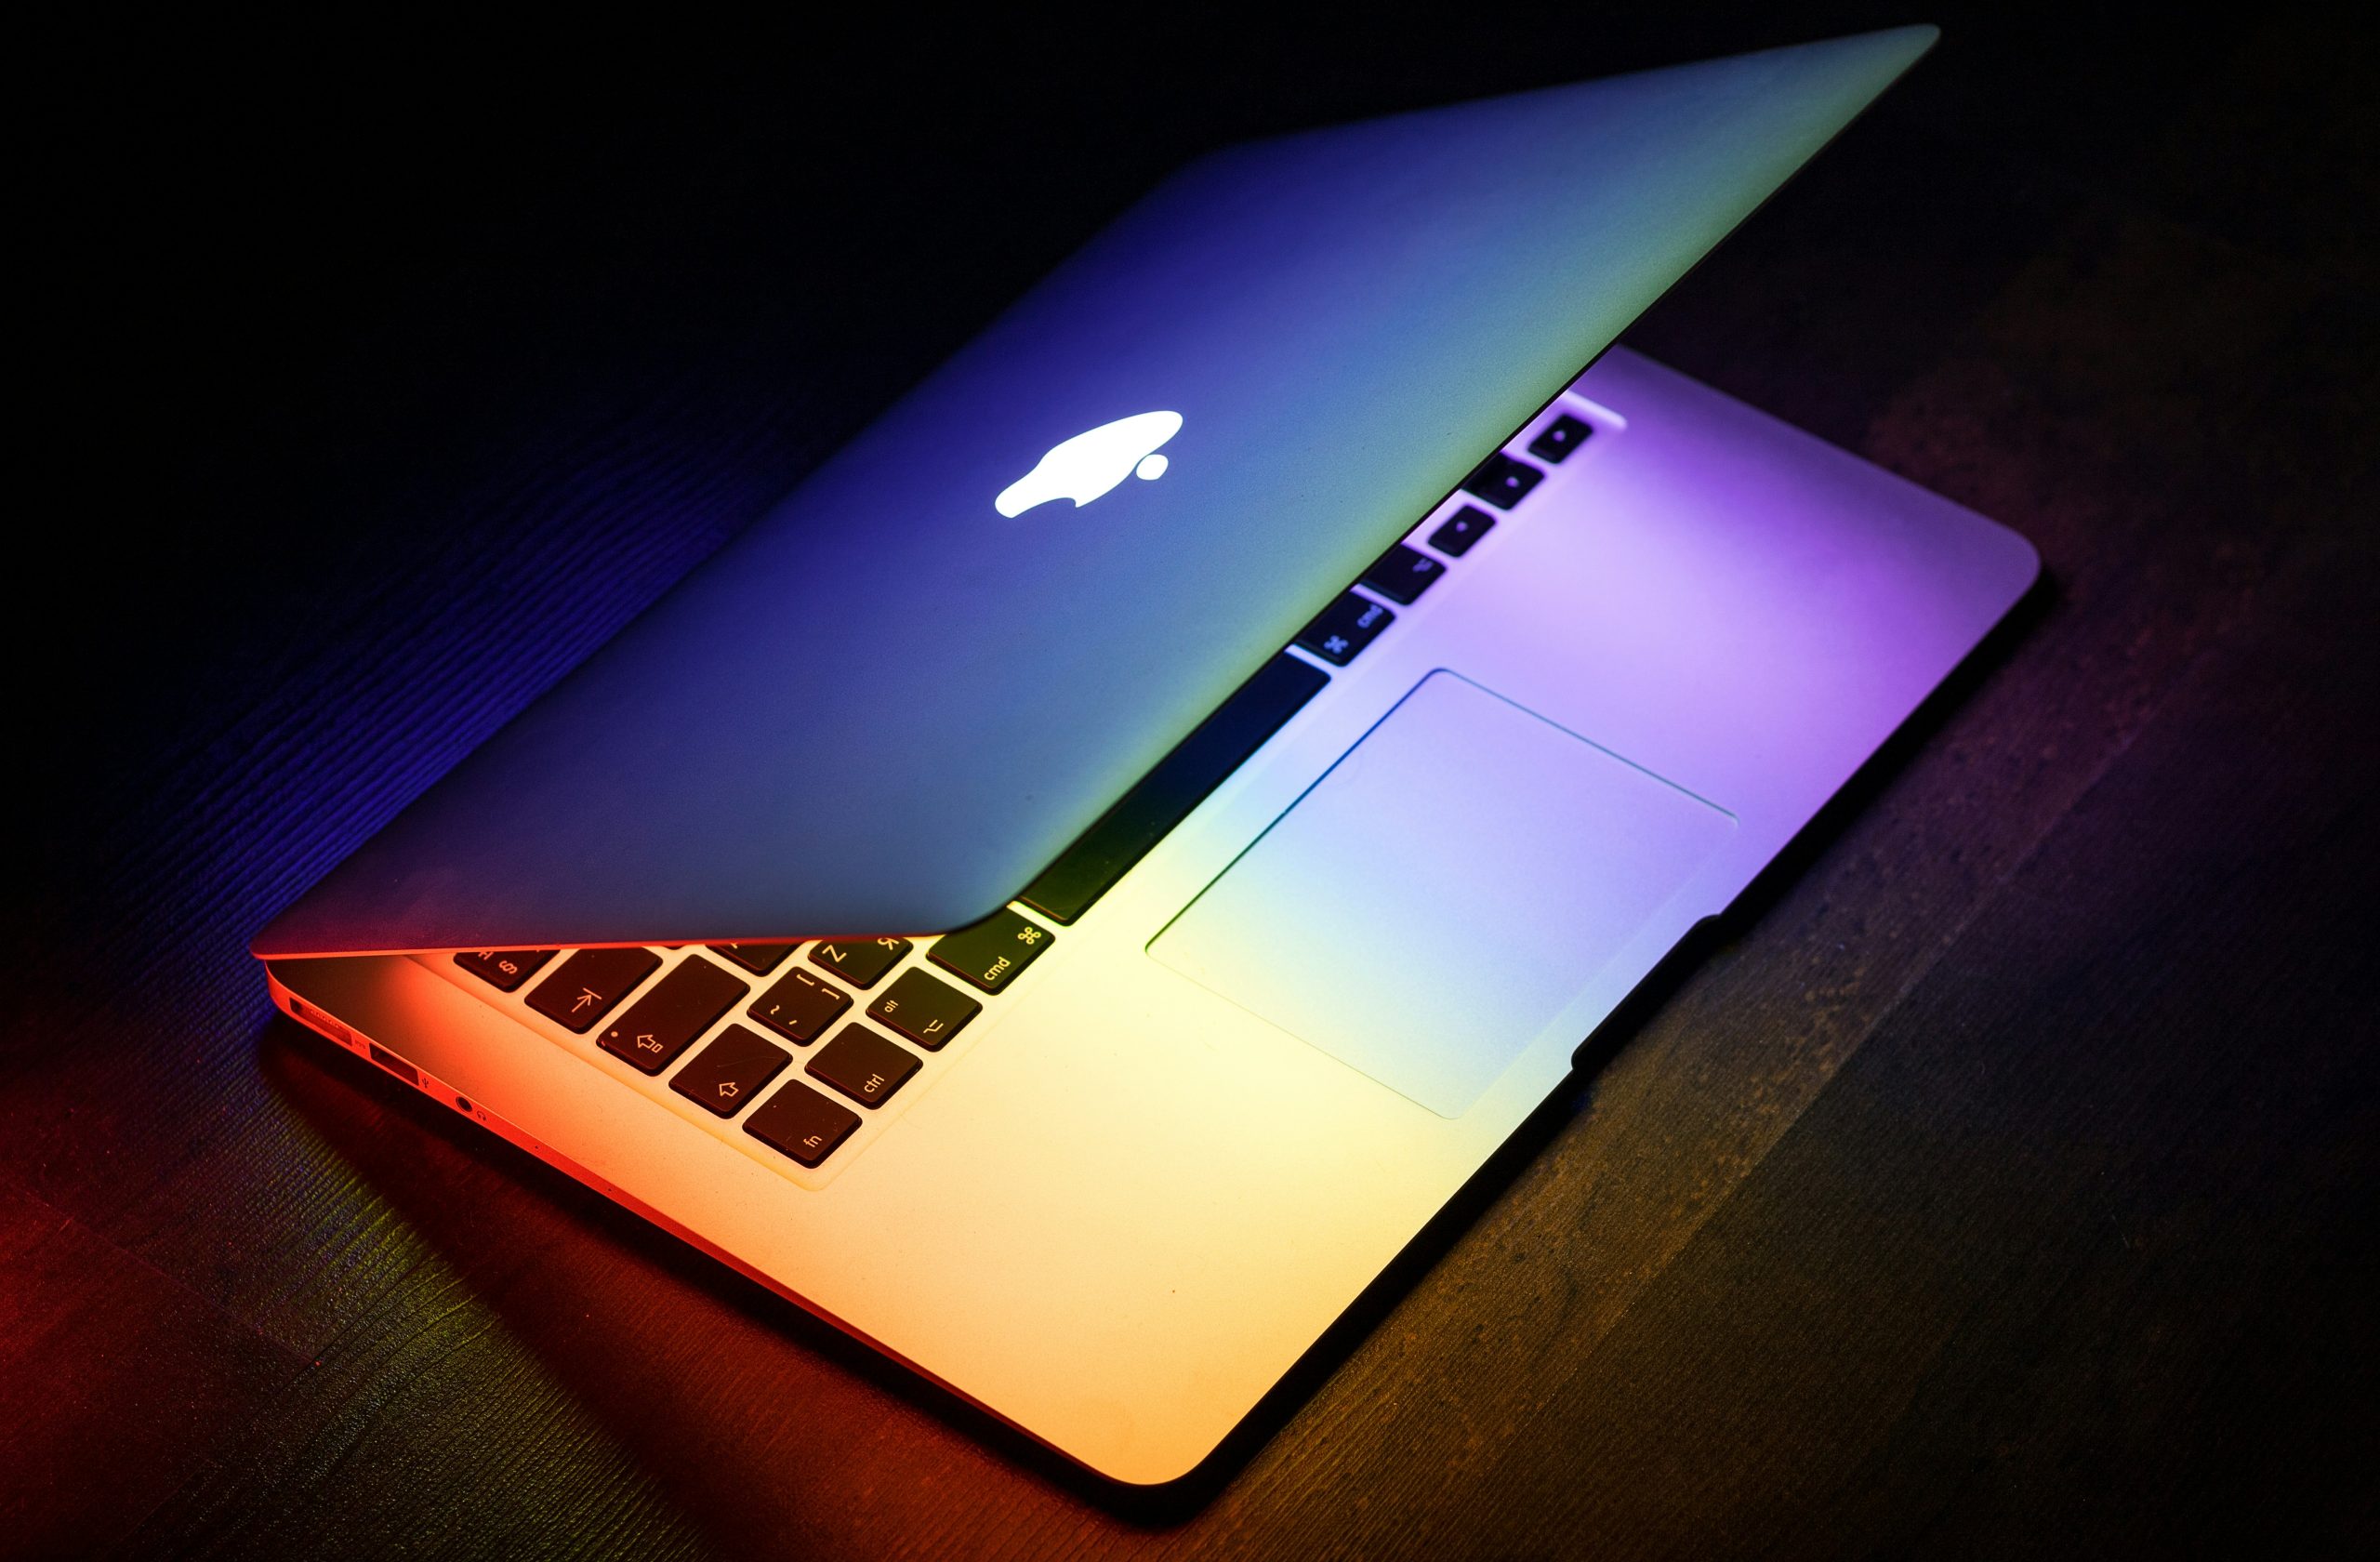 A partially open laptop with a glowing apple logo, emitting a spectrum of colorful light across its keyboard and surface, sits on a dark desk. The vibrant display inspires innovative business ideas for women, highlighting the potential for female entrepreneurs starting a business.